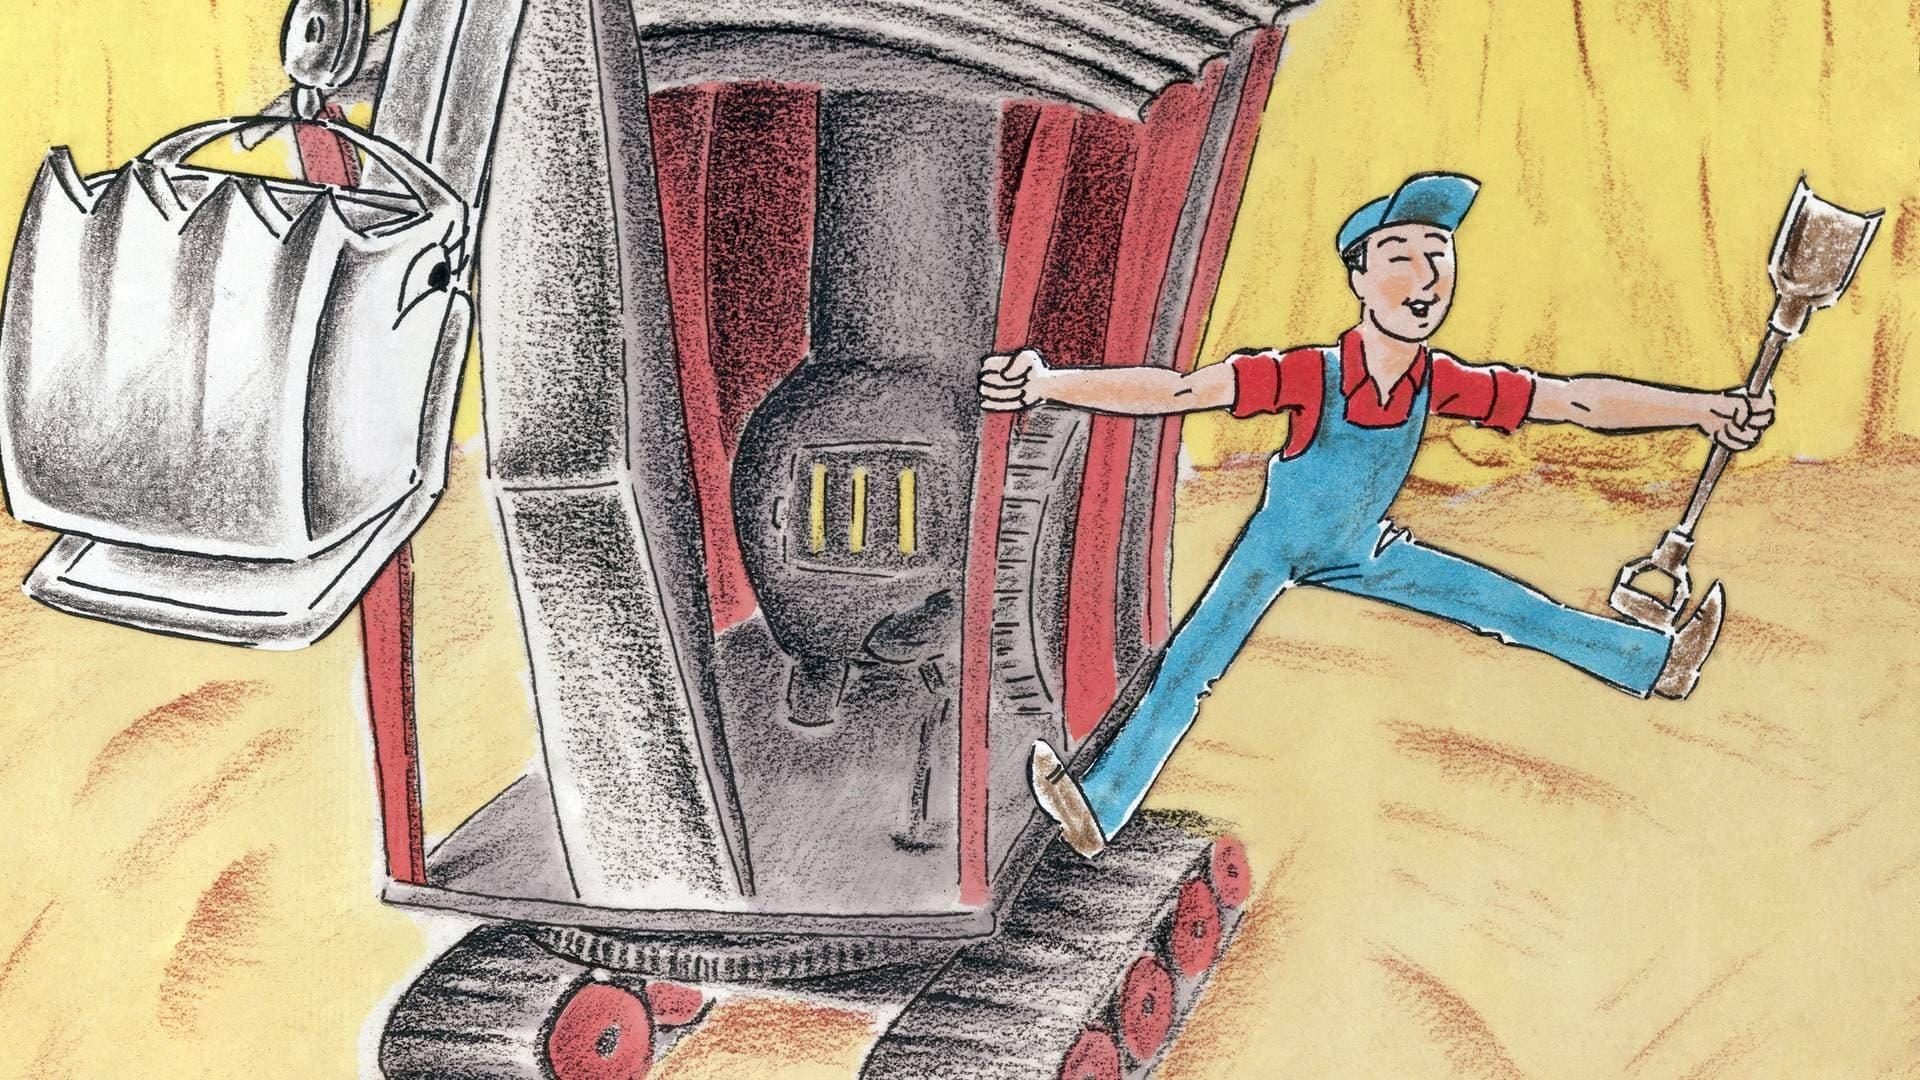 Mike Mulligan and His Steam Shovel backdrop